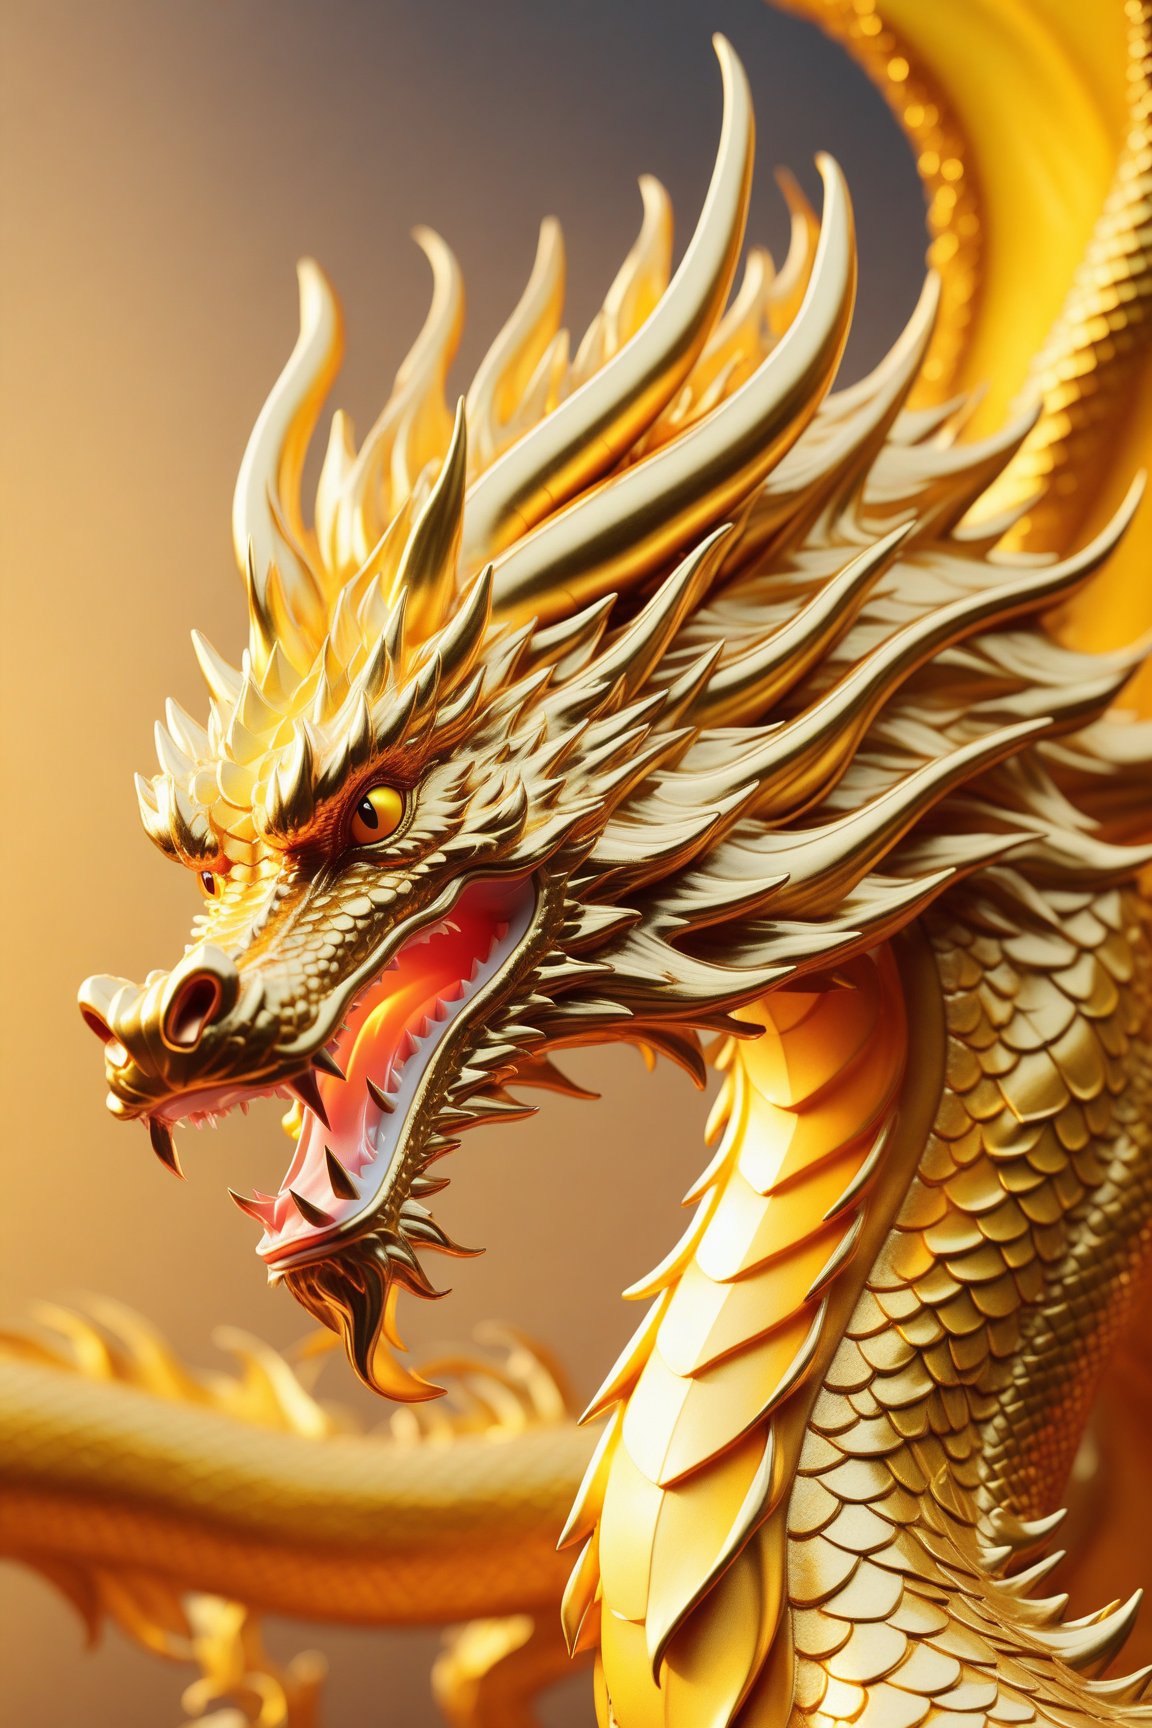 A smooth Chinese golden dragon,  flaming dragon snake,  dragon oil painting,  Chinese dragon,  perfect smooth body lines,  golden dragon,  flaming dragon,  majestic Chinese dragon,  phoenix dragon,  Chinese dragon concept art,  dragon art,  dragon god,  dragon on a yellow background,  ultra high definition,  realistic,  rich in detail,  perfect UHD image quality,  neon colors,  ultra fine edges,  incredible,  perfect golden ratio compositions,  magical fine technological lines,  cinematic,  high definition,  fine light and shadow,  high detail,  3D rendering,<lora:EMS-24184-EMS:1.400000>,<lora:EMS-22494-EMS:1.500000>,<lora:EMS-20443-EMS:1.600000>